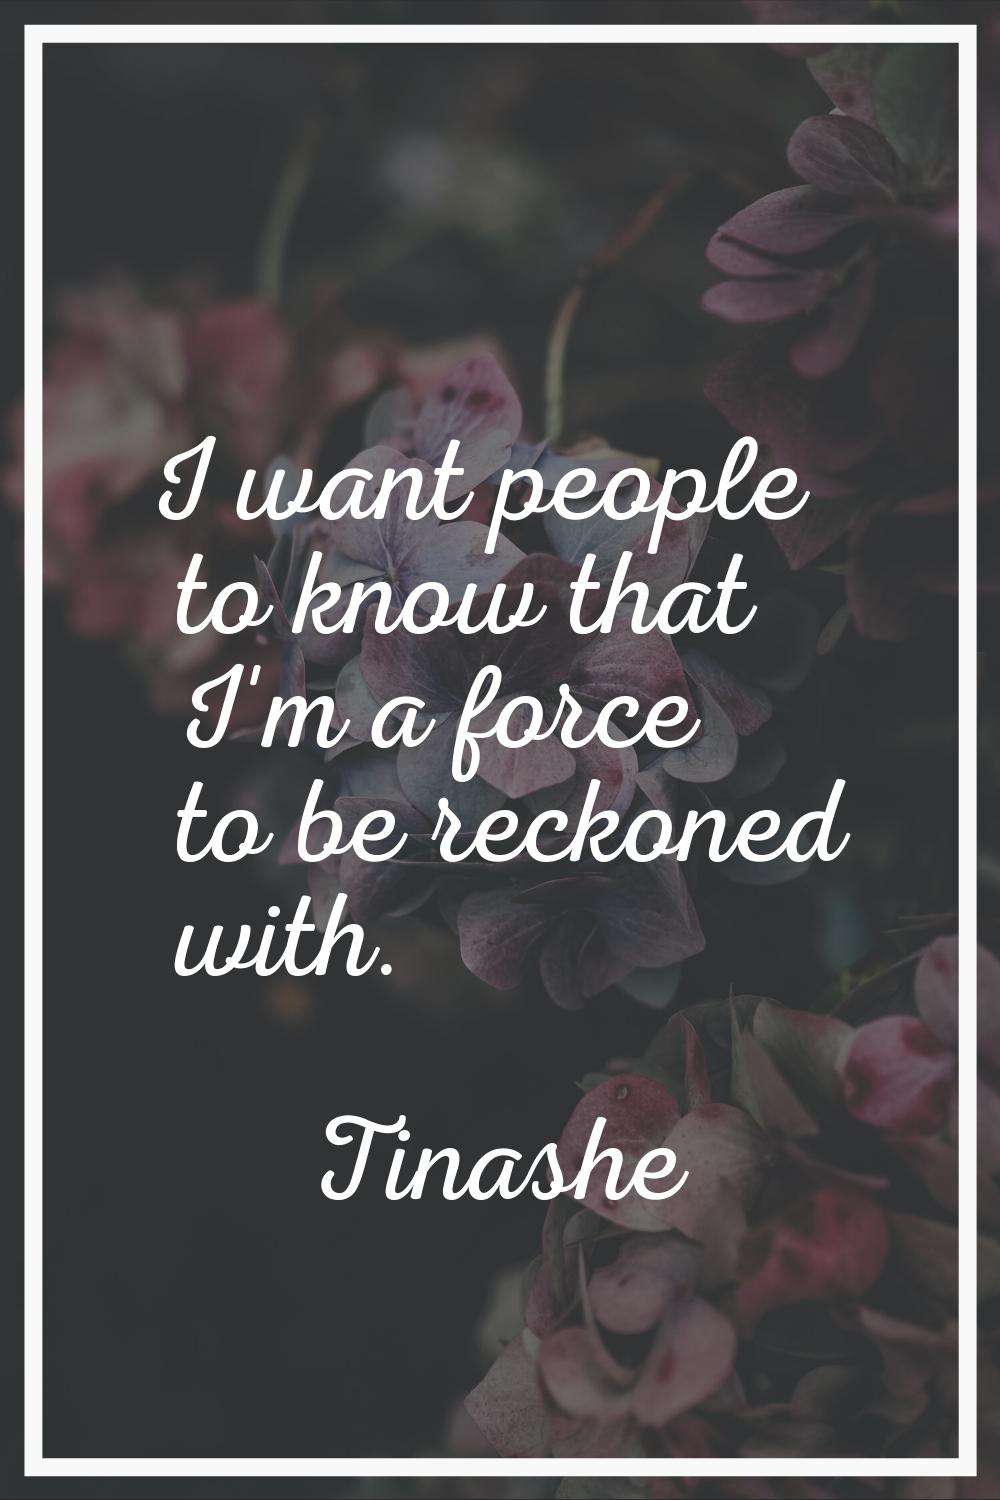 I want people to know that I'm a force to be reckoned with.